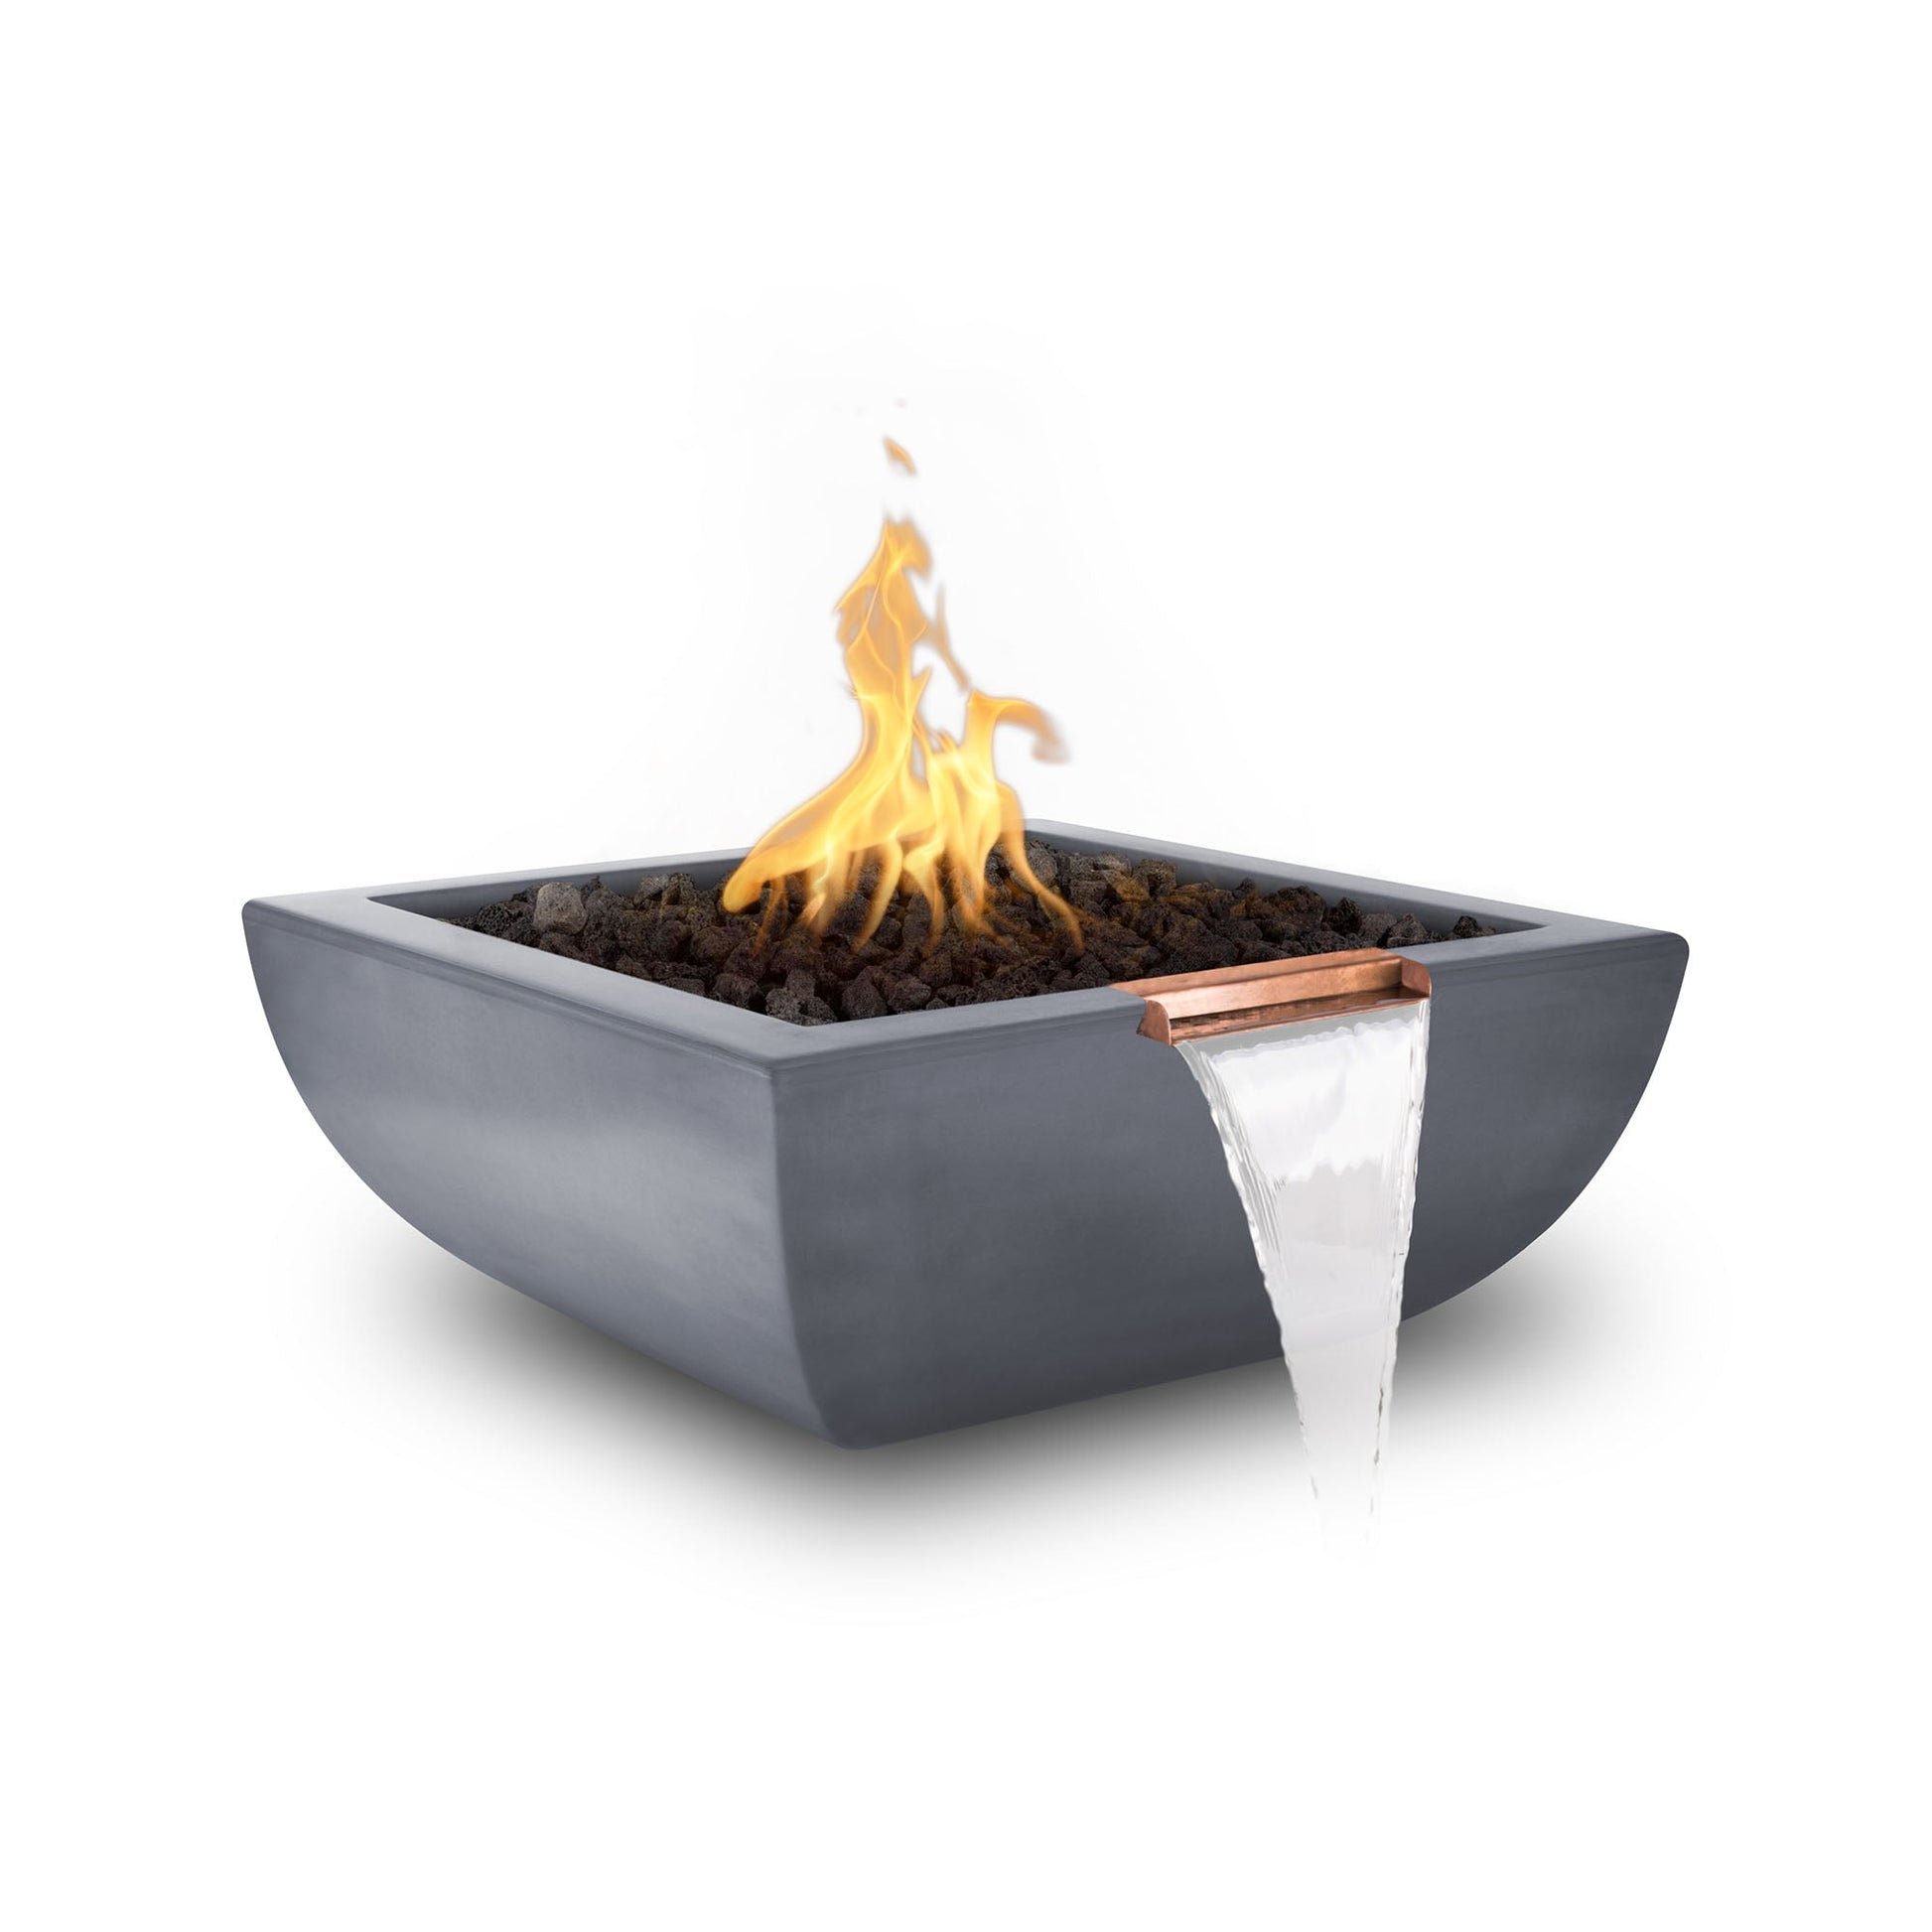 The Outdoor Plus Square Avalon 24" Metallic Bronze GFRC Concrete Natural Gas Fire & Water Bowl with Match Lit with Flame Sense Ignition